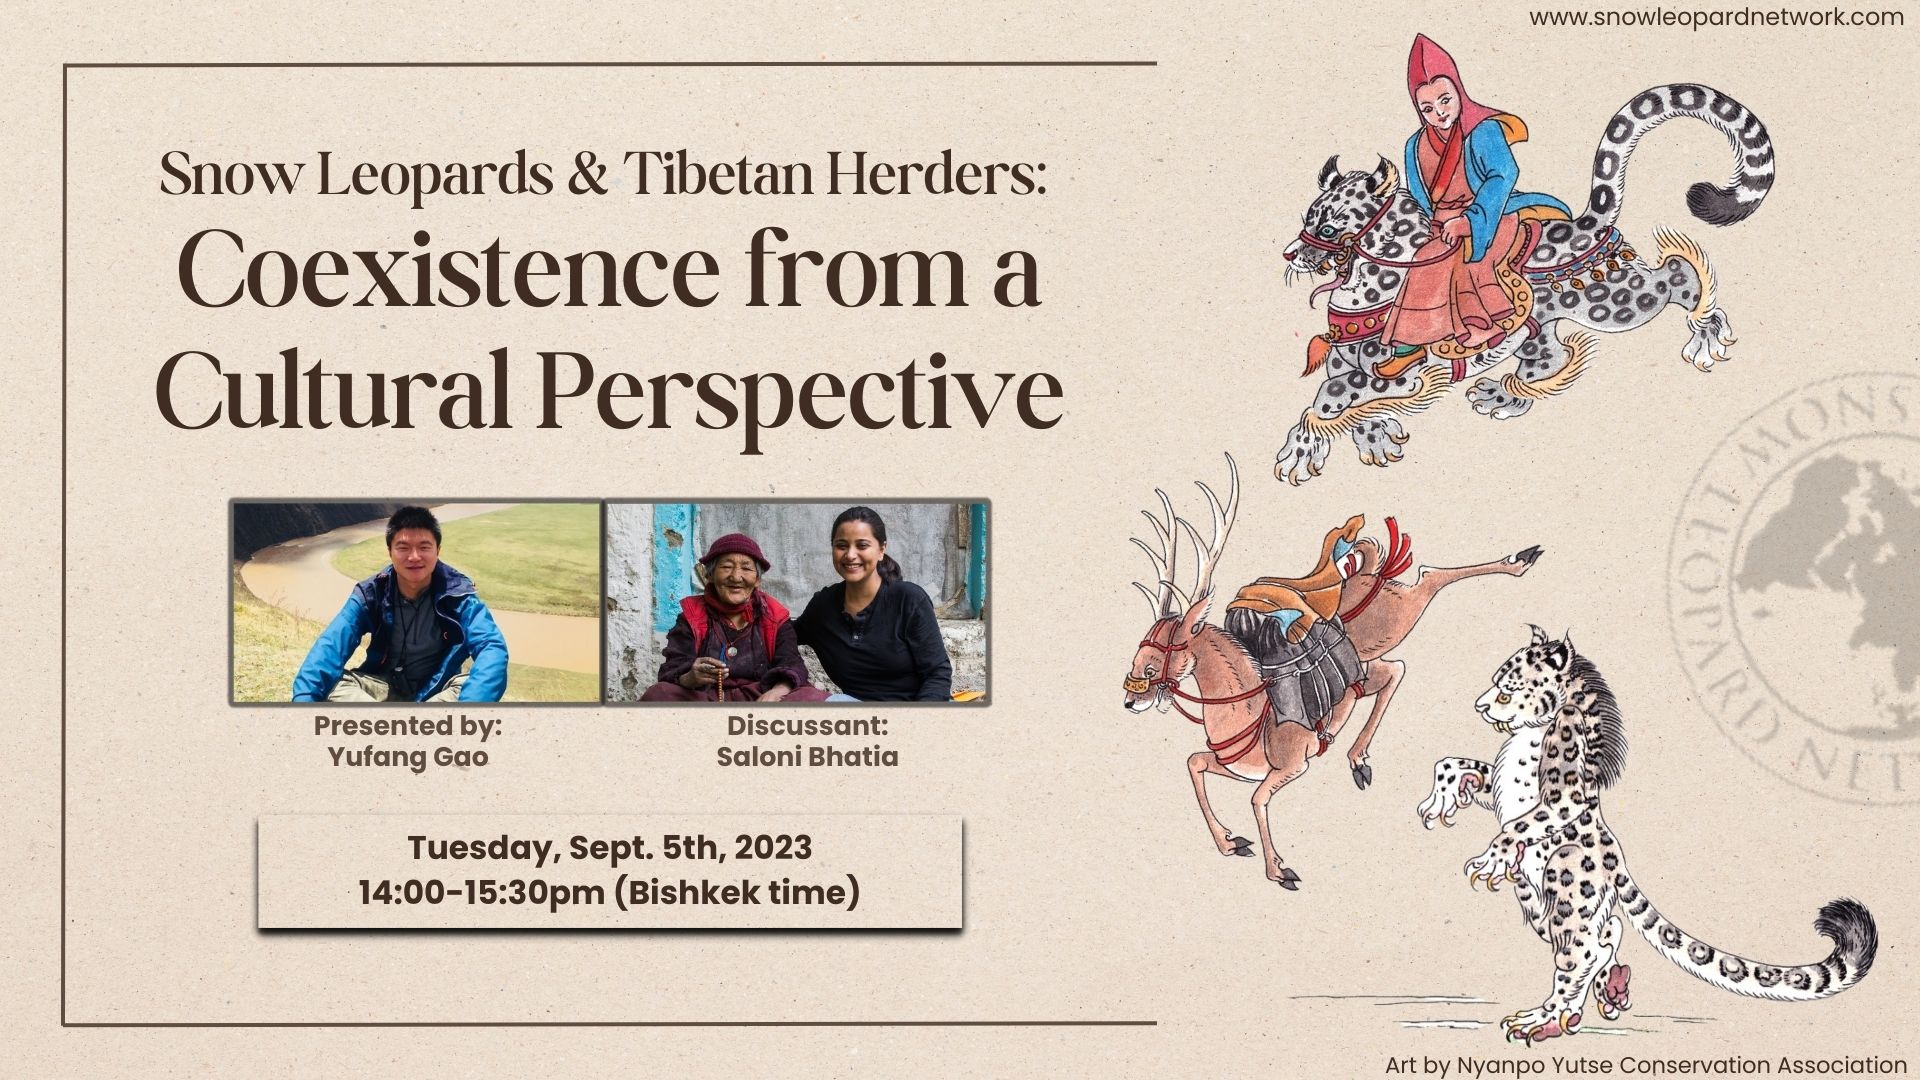 SLN Webinar: Snow Leopards and Tibetan Herders: Coexistence from a Cultural Perspective